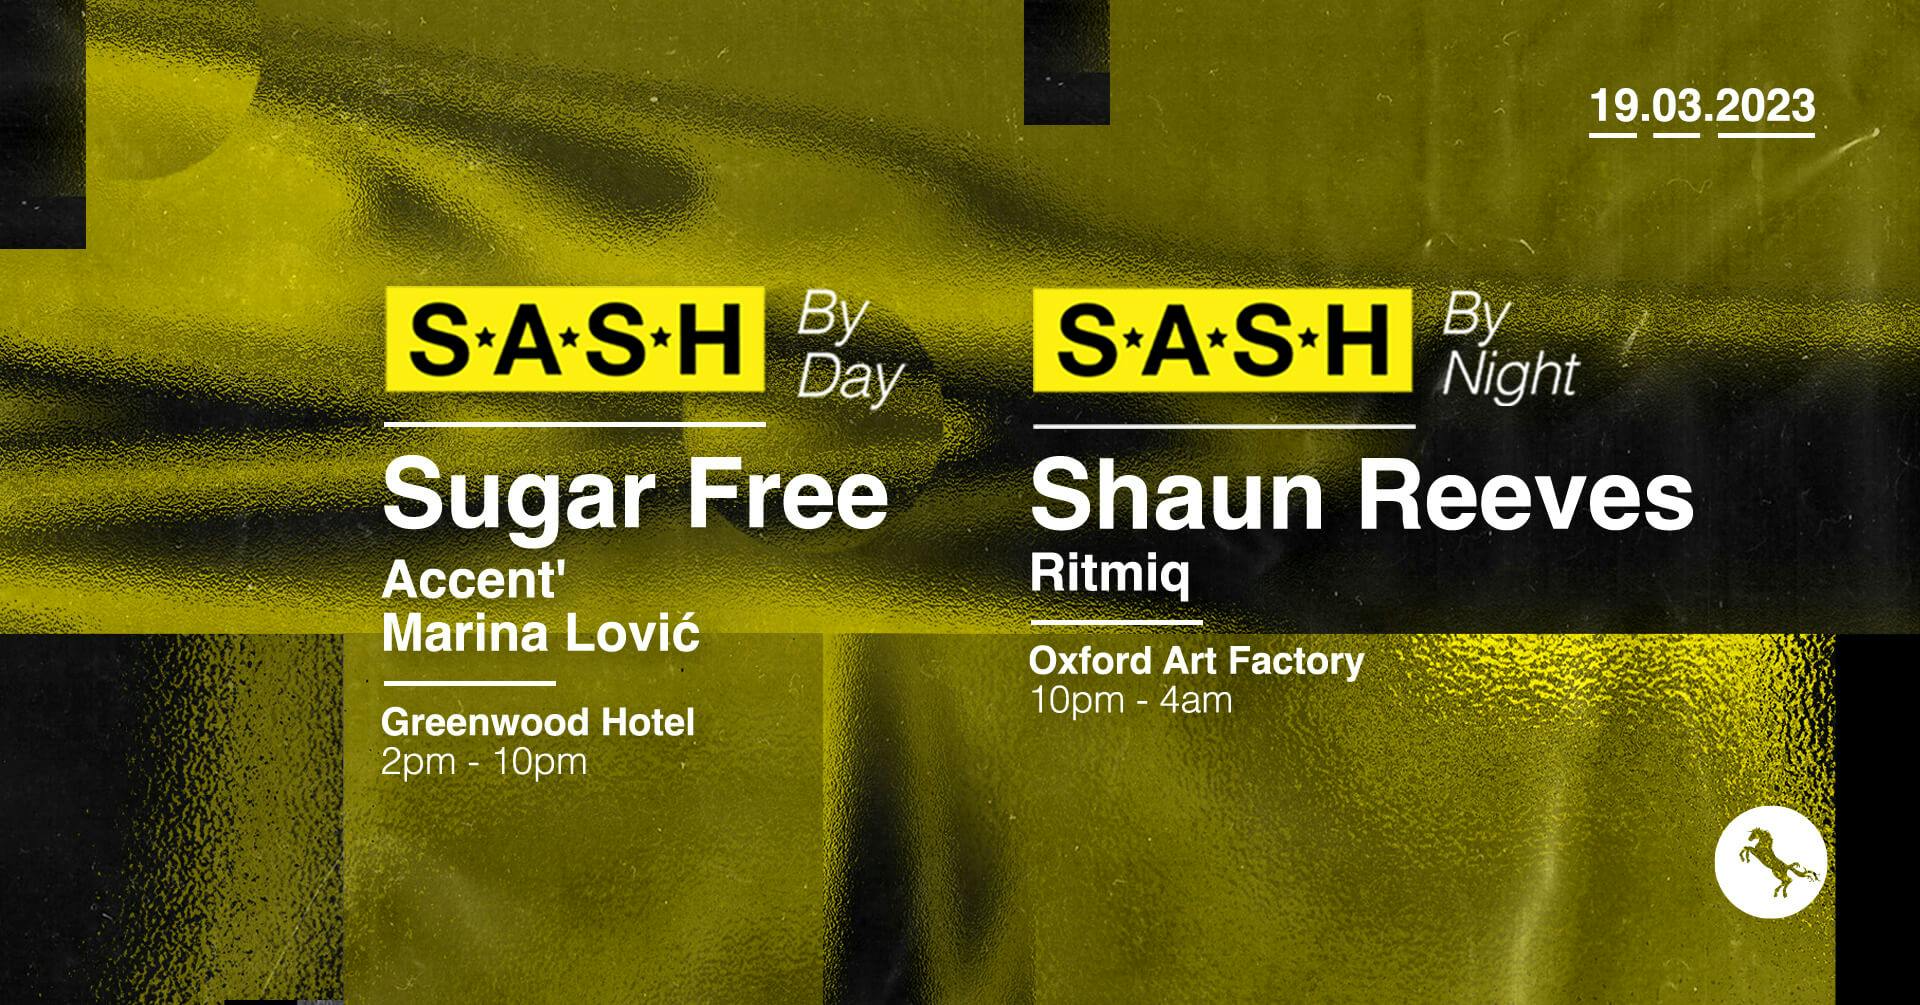 ★ S.A.S.H By Day & Night ★ Sugar Free ★ Shaun Reeves ★ 19th March ★